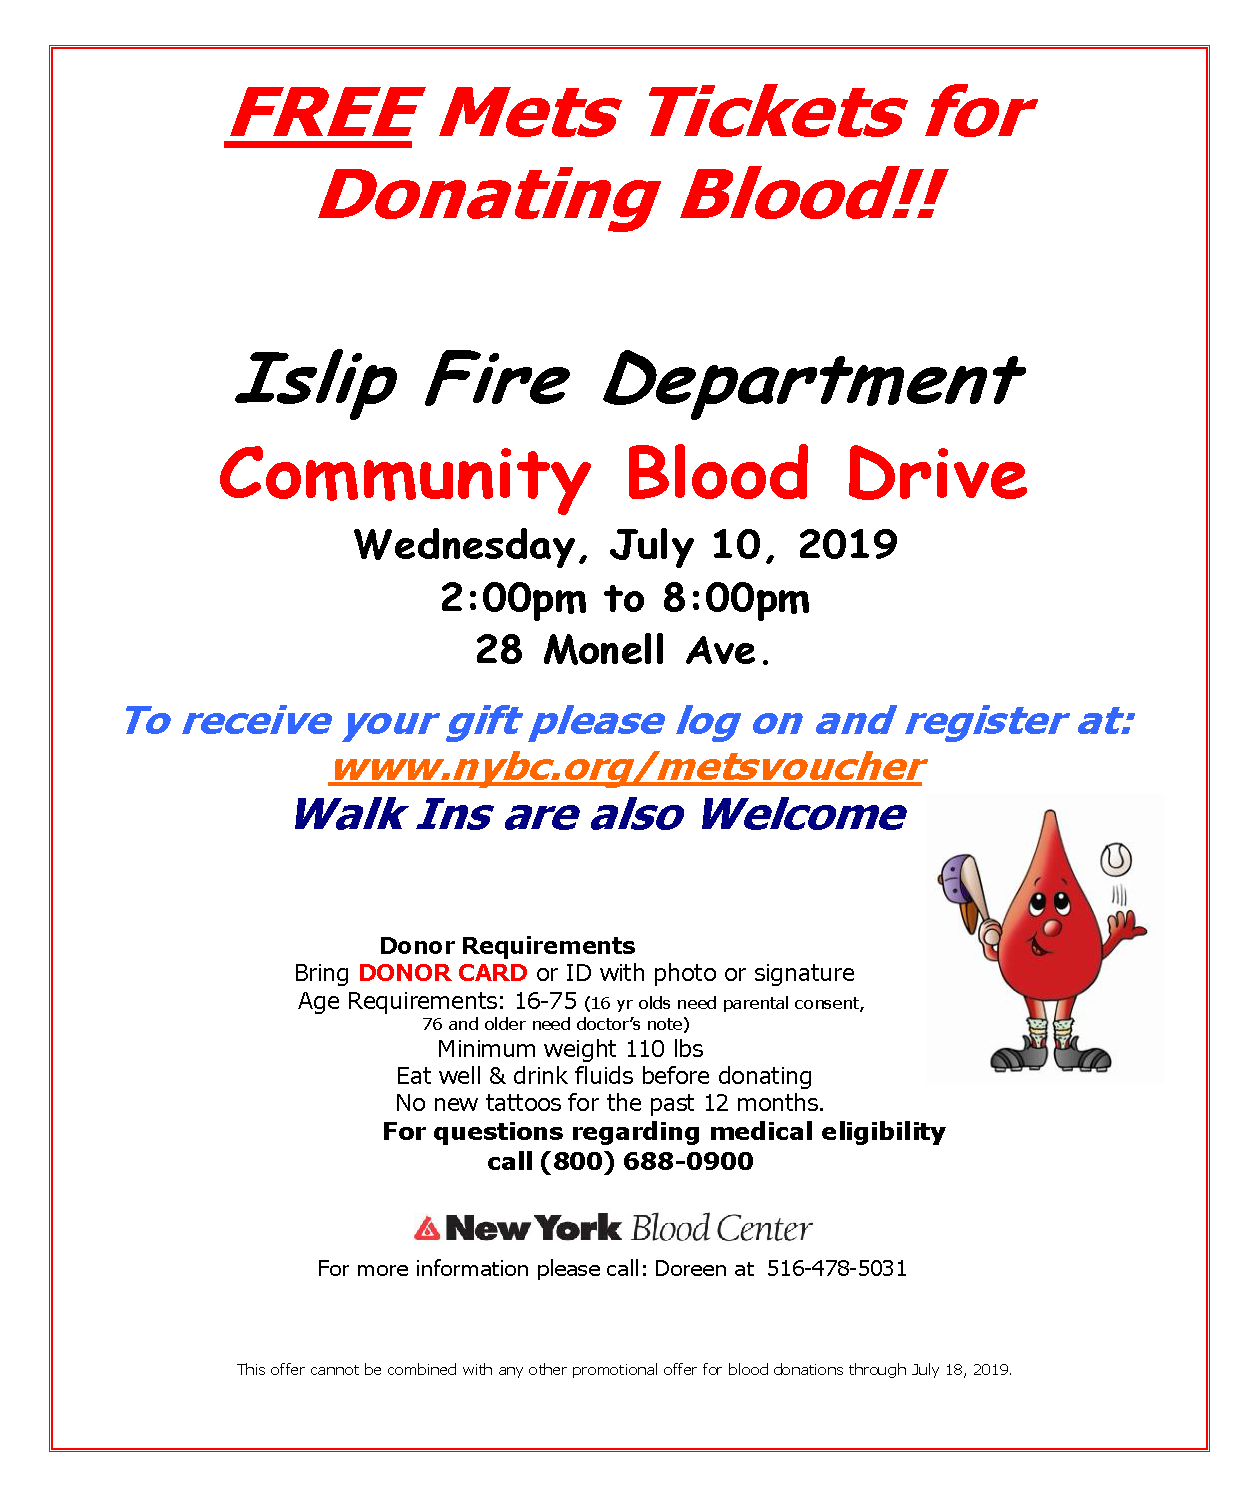 A flyer announcing free Mets tickets at the July 10th IFD Blood Drive, call 516-478-5031 for more information